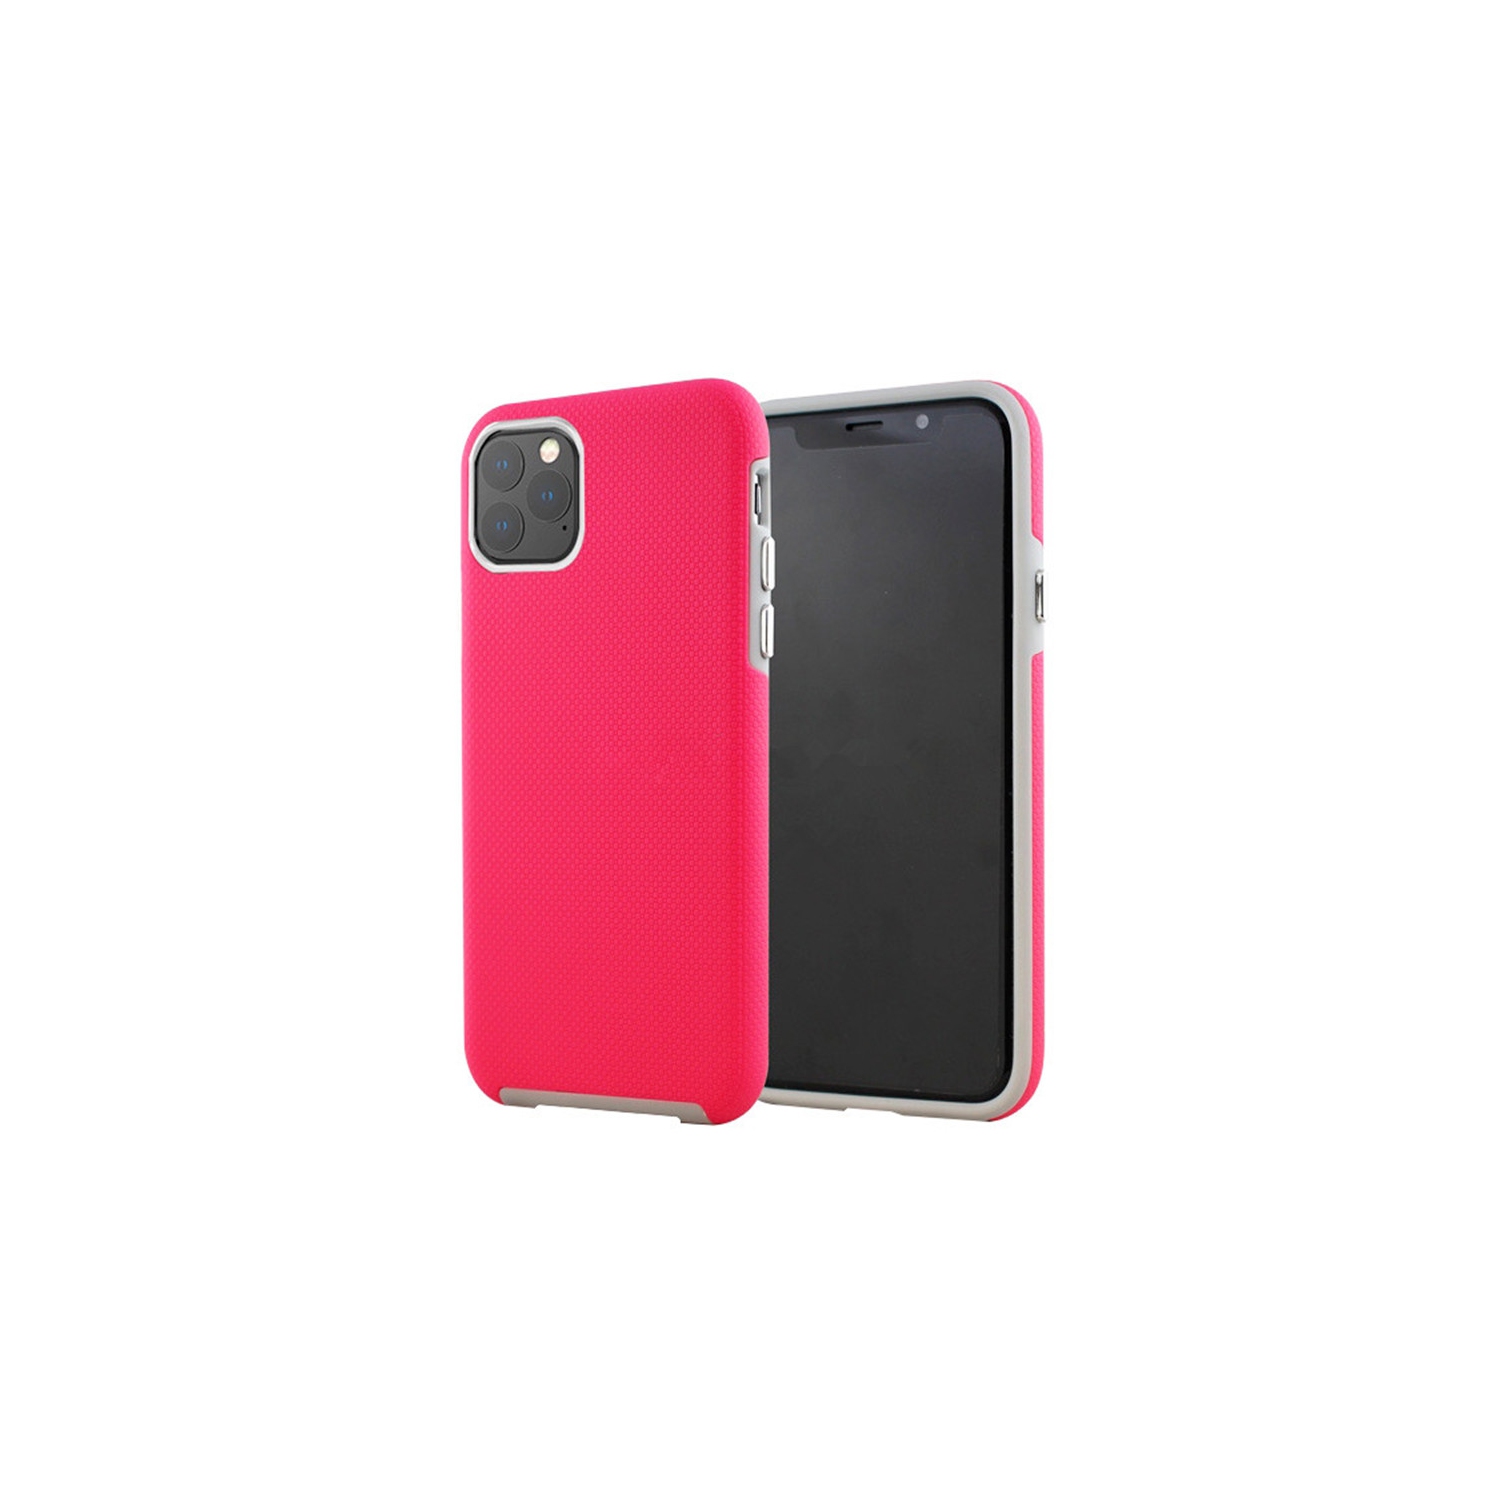 【CSmart】 Slim Fitted Hybrid Hard PC Shell Shockproof Scratch Resistant Case Cover for iPhone 12 mini (5.4"), Hot Pink